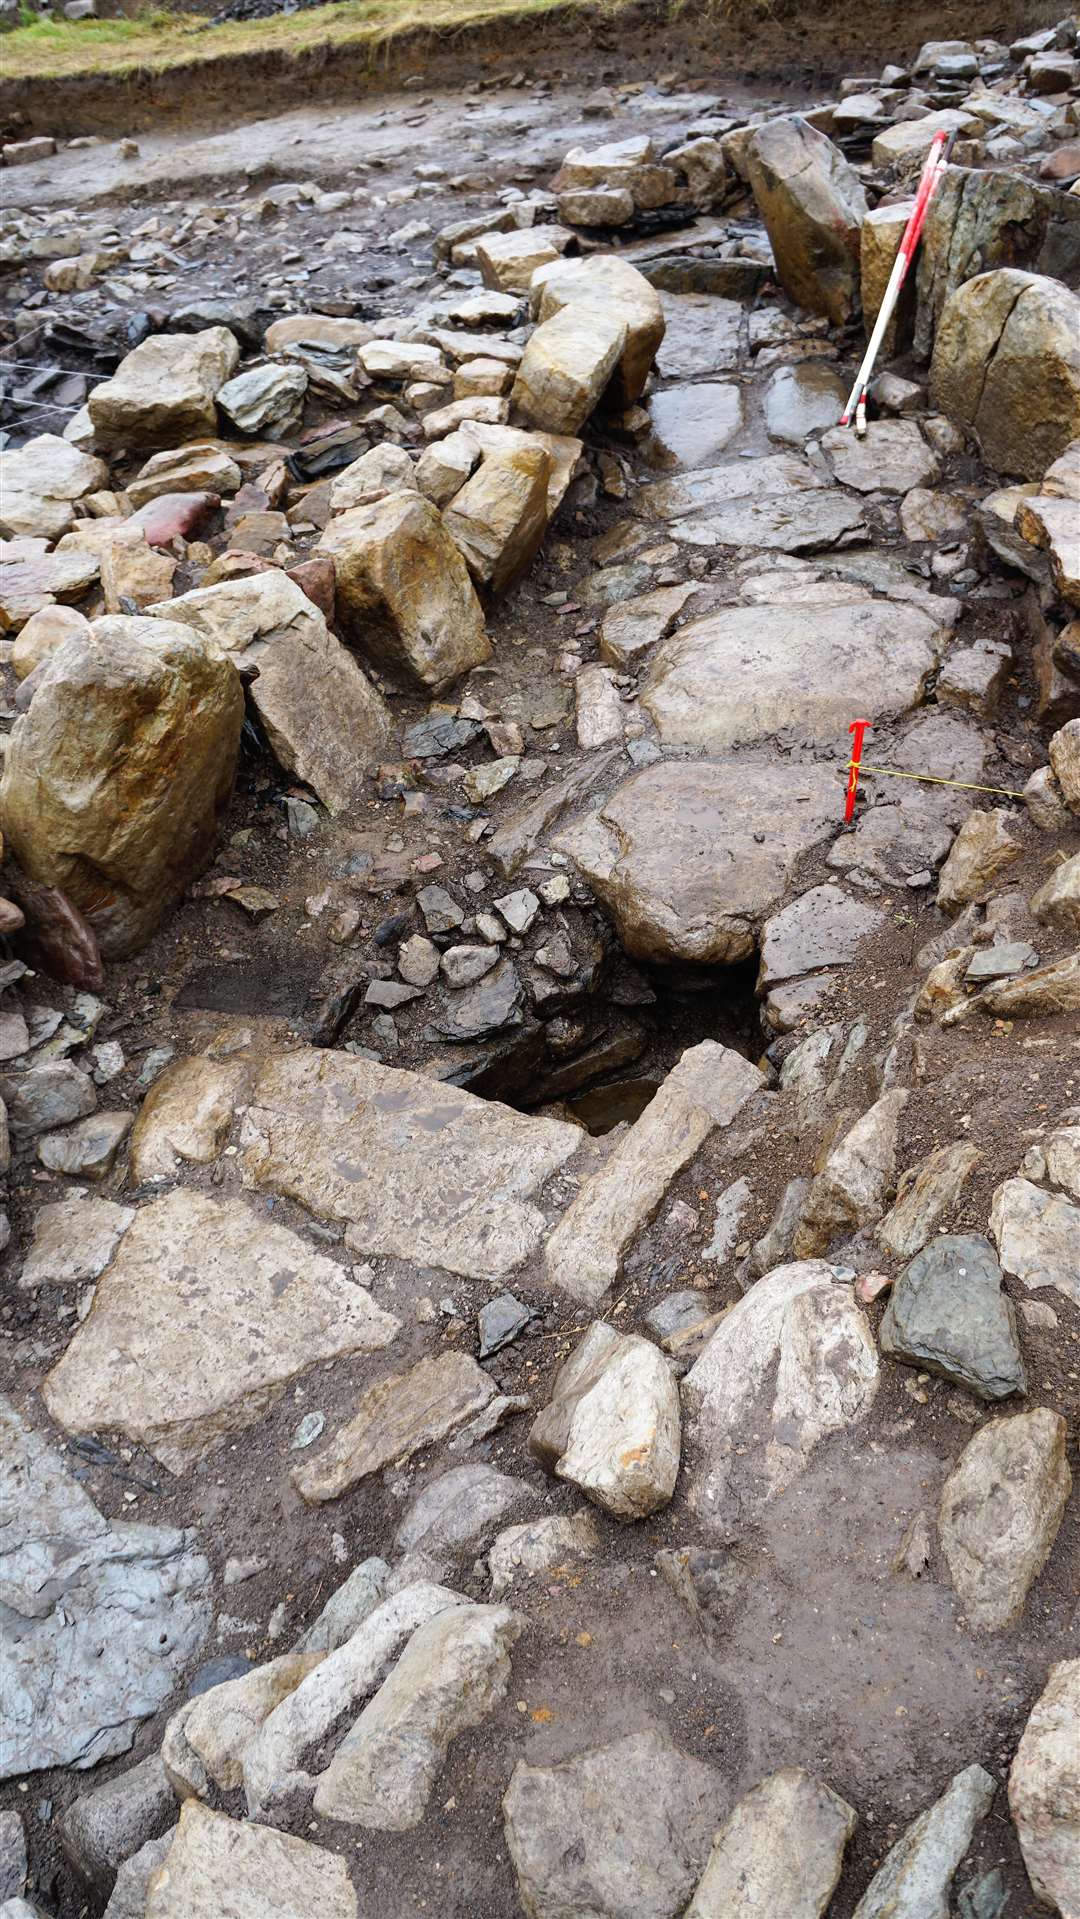 This part of the dig at Swartigill appears to be a souterrain and may have been used to store food. It was als discovered that there are channels under it that may have allowed water to flow through to help cool and preserve the larder. Picture: DGS